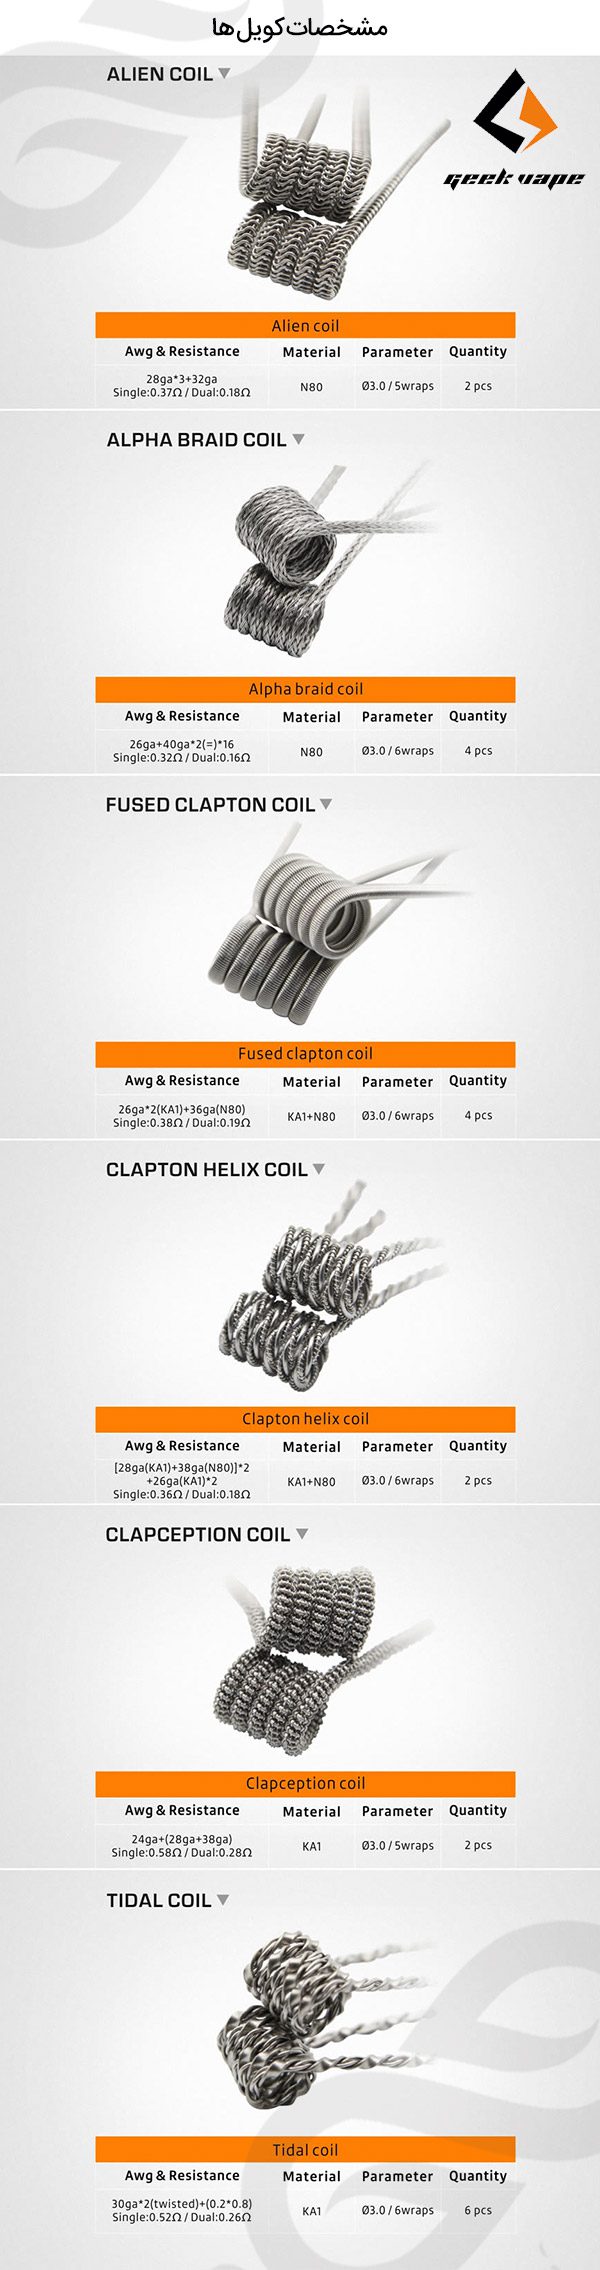 geekvape 6in1pack coil details